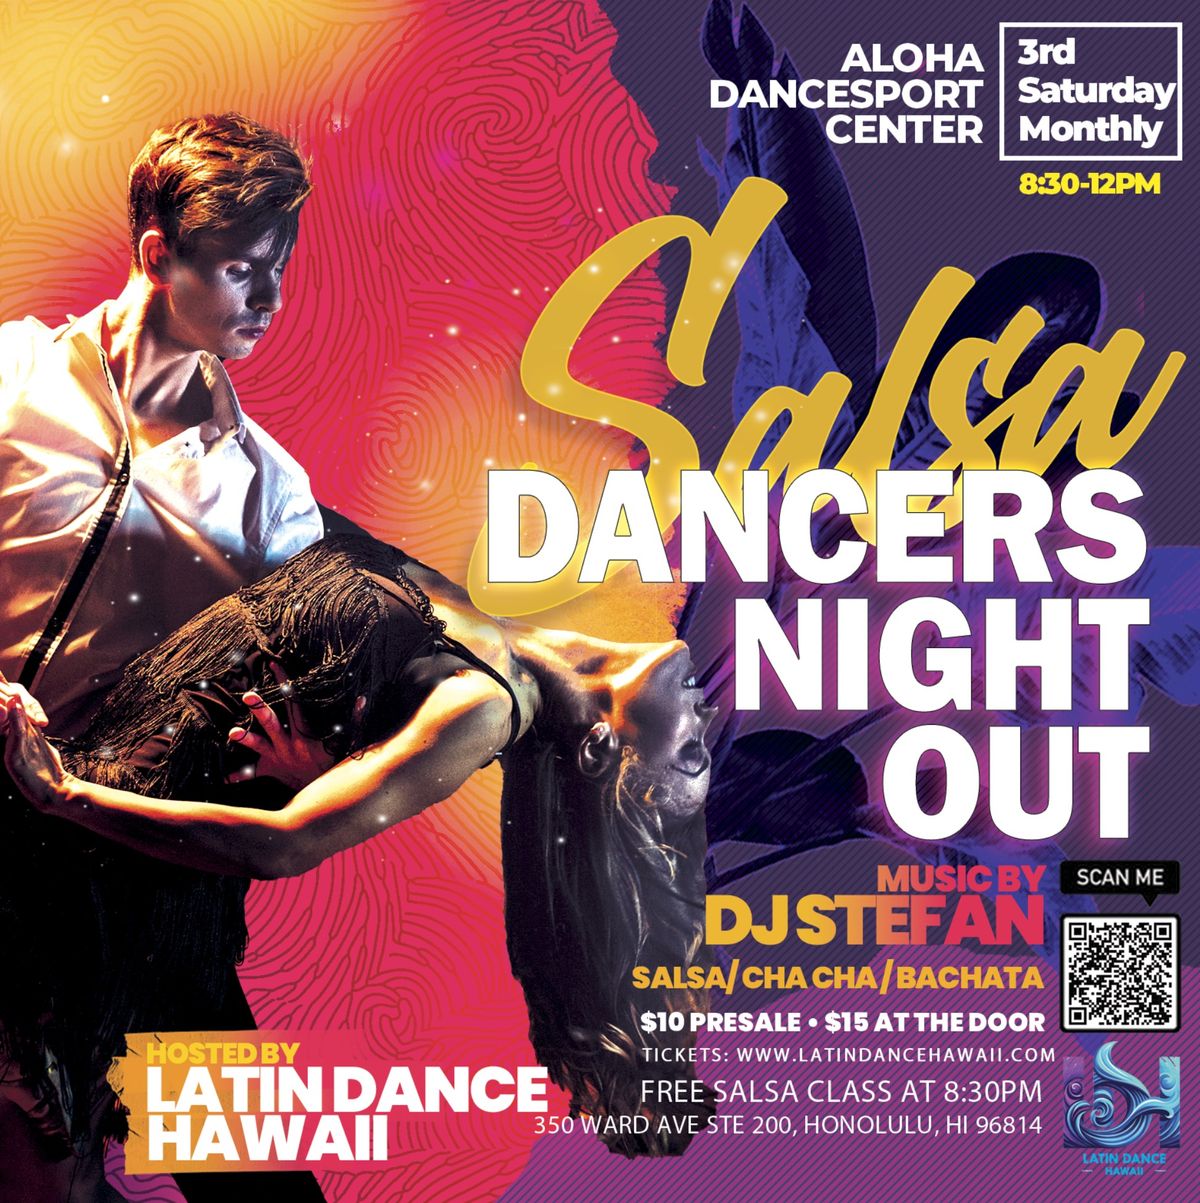 Dancer's Night Out (hosted by: Latin Dance Hawaii) + CHA CHA WORKSHOP